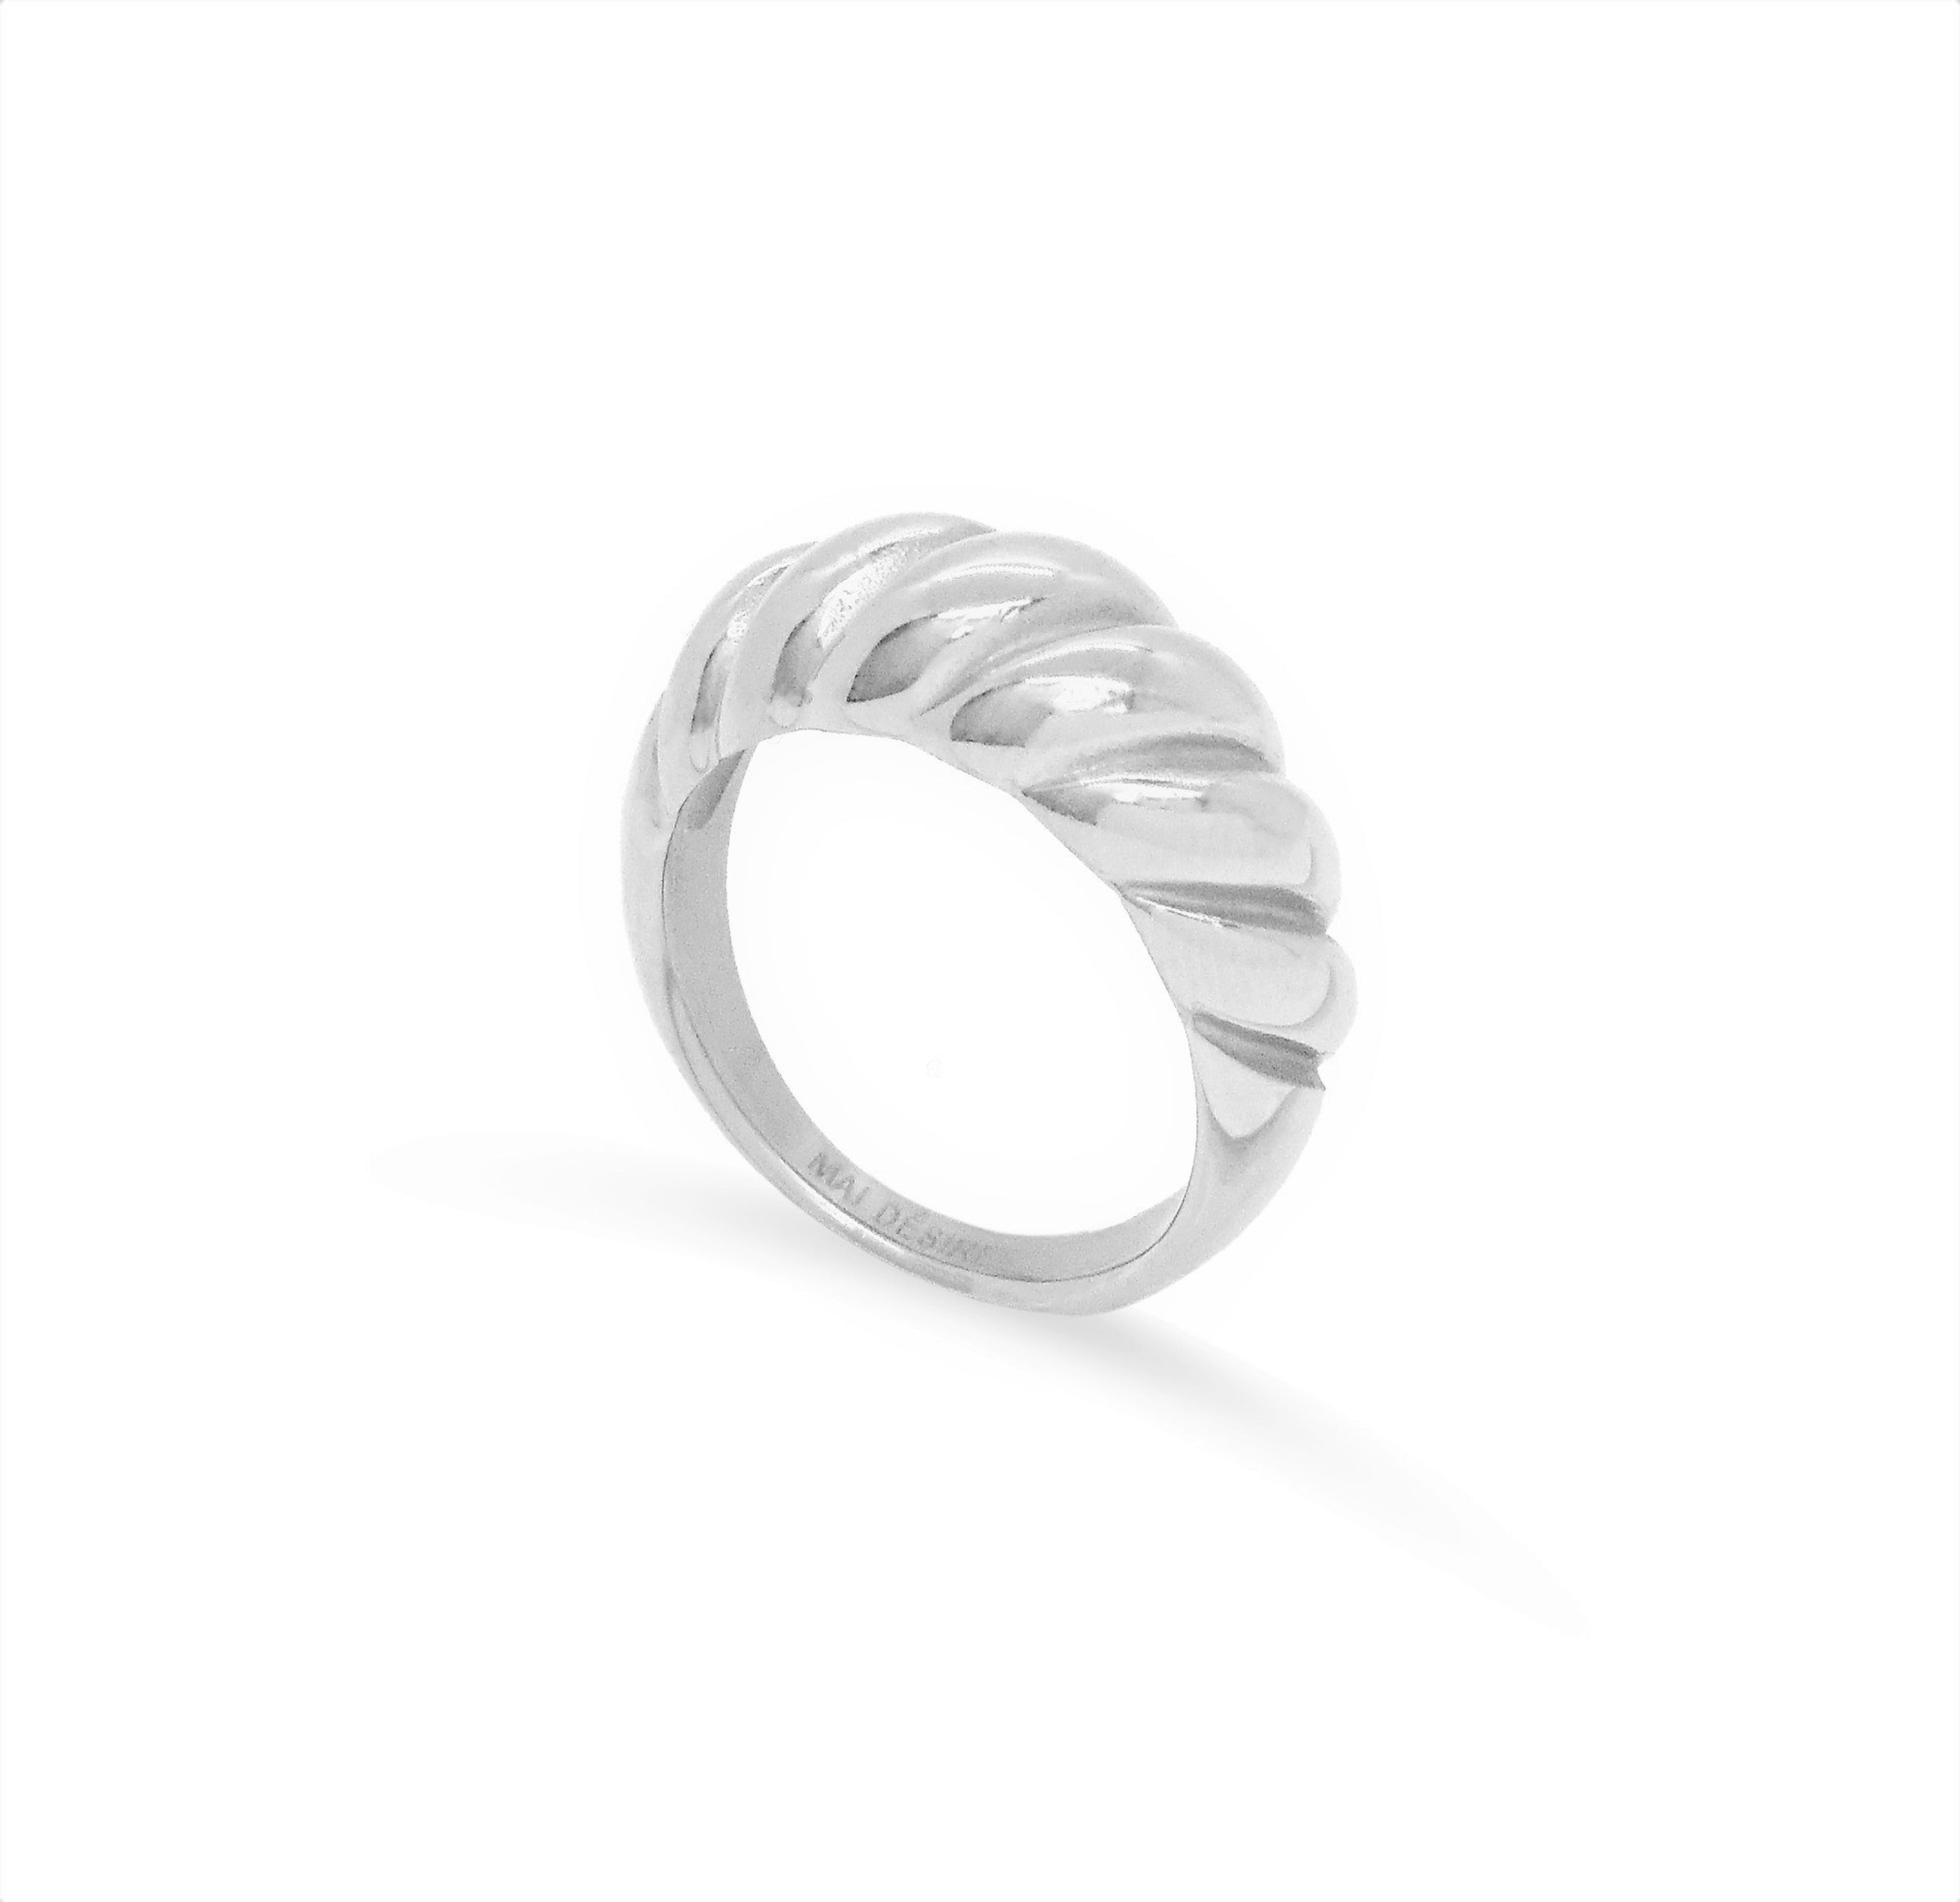 Silver classic croissant ring. Waterproof rings